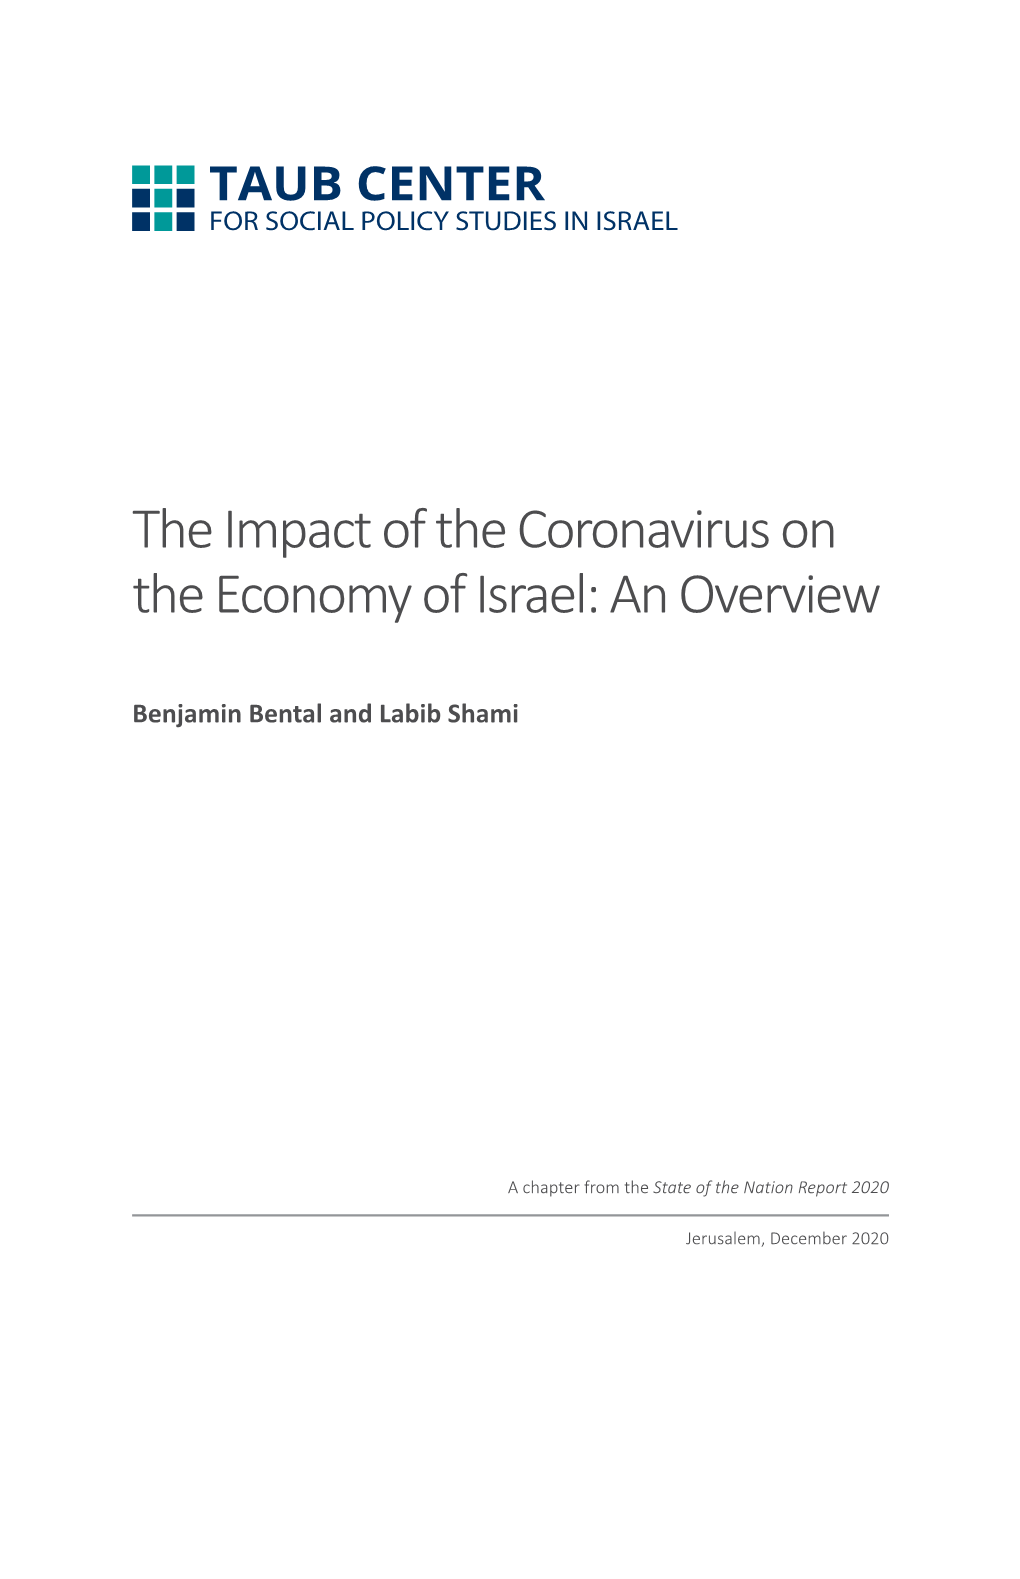 The Impact of the Coronavirus on the Economy of Israel: an Overview